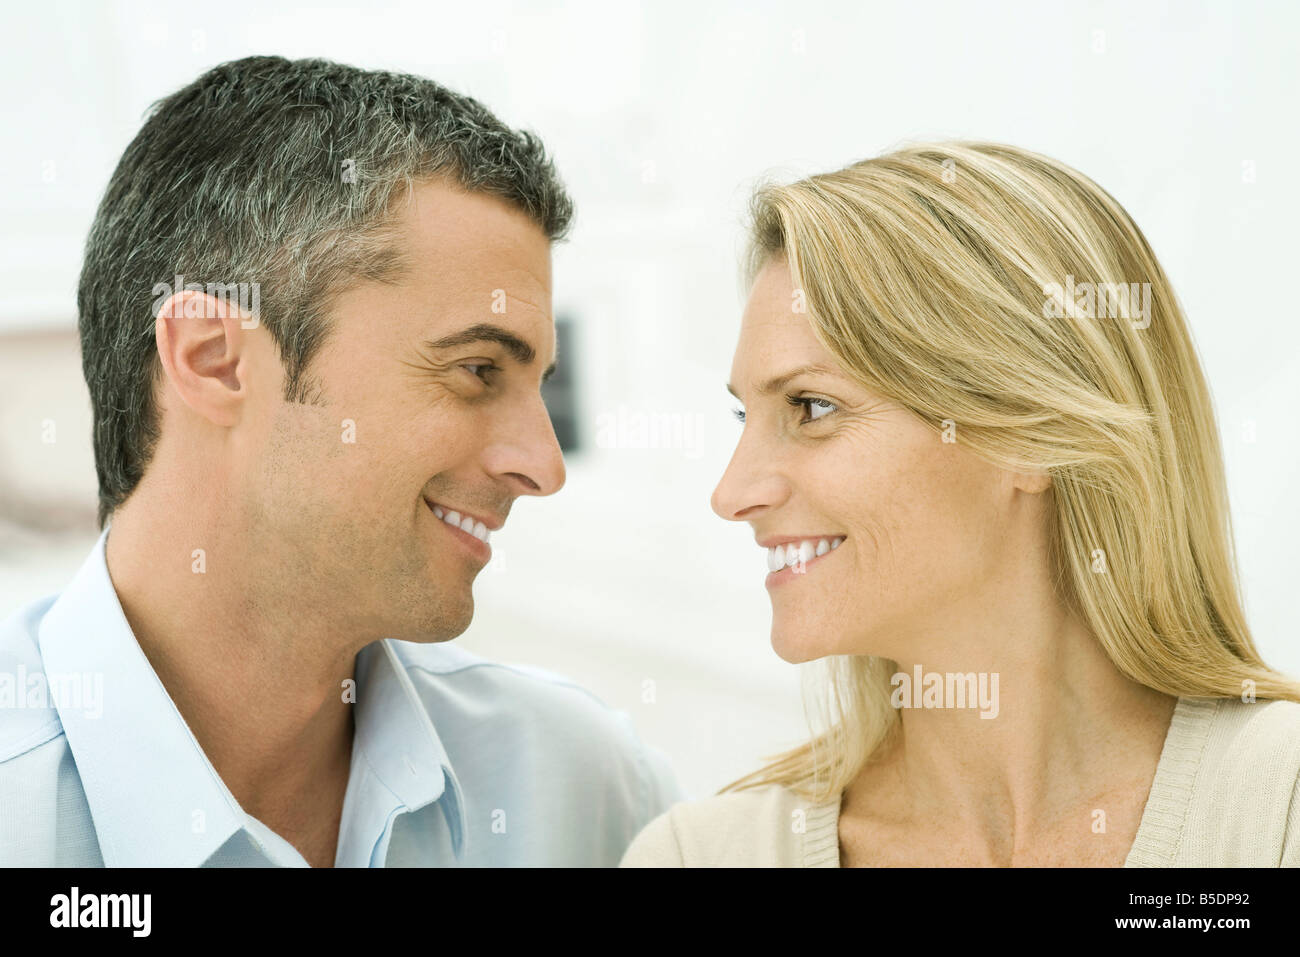 Couple smiling at each other Stock Photo